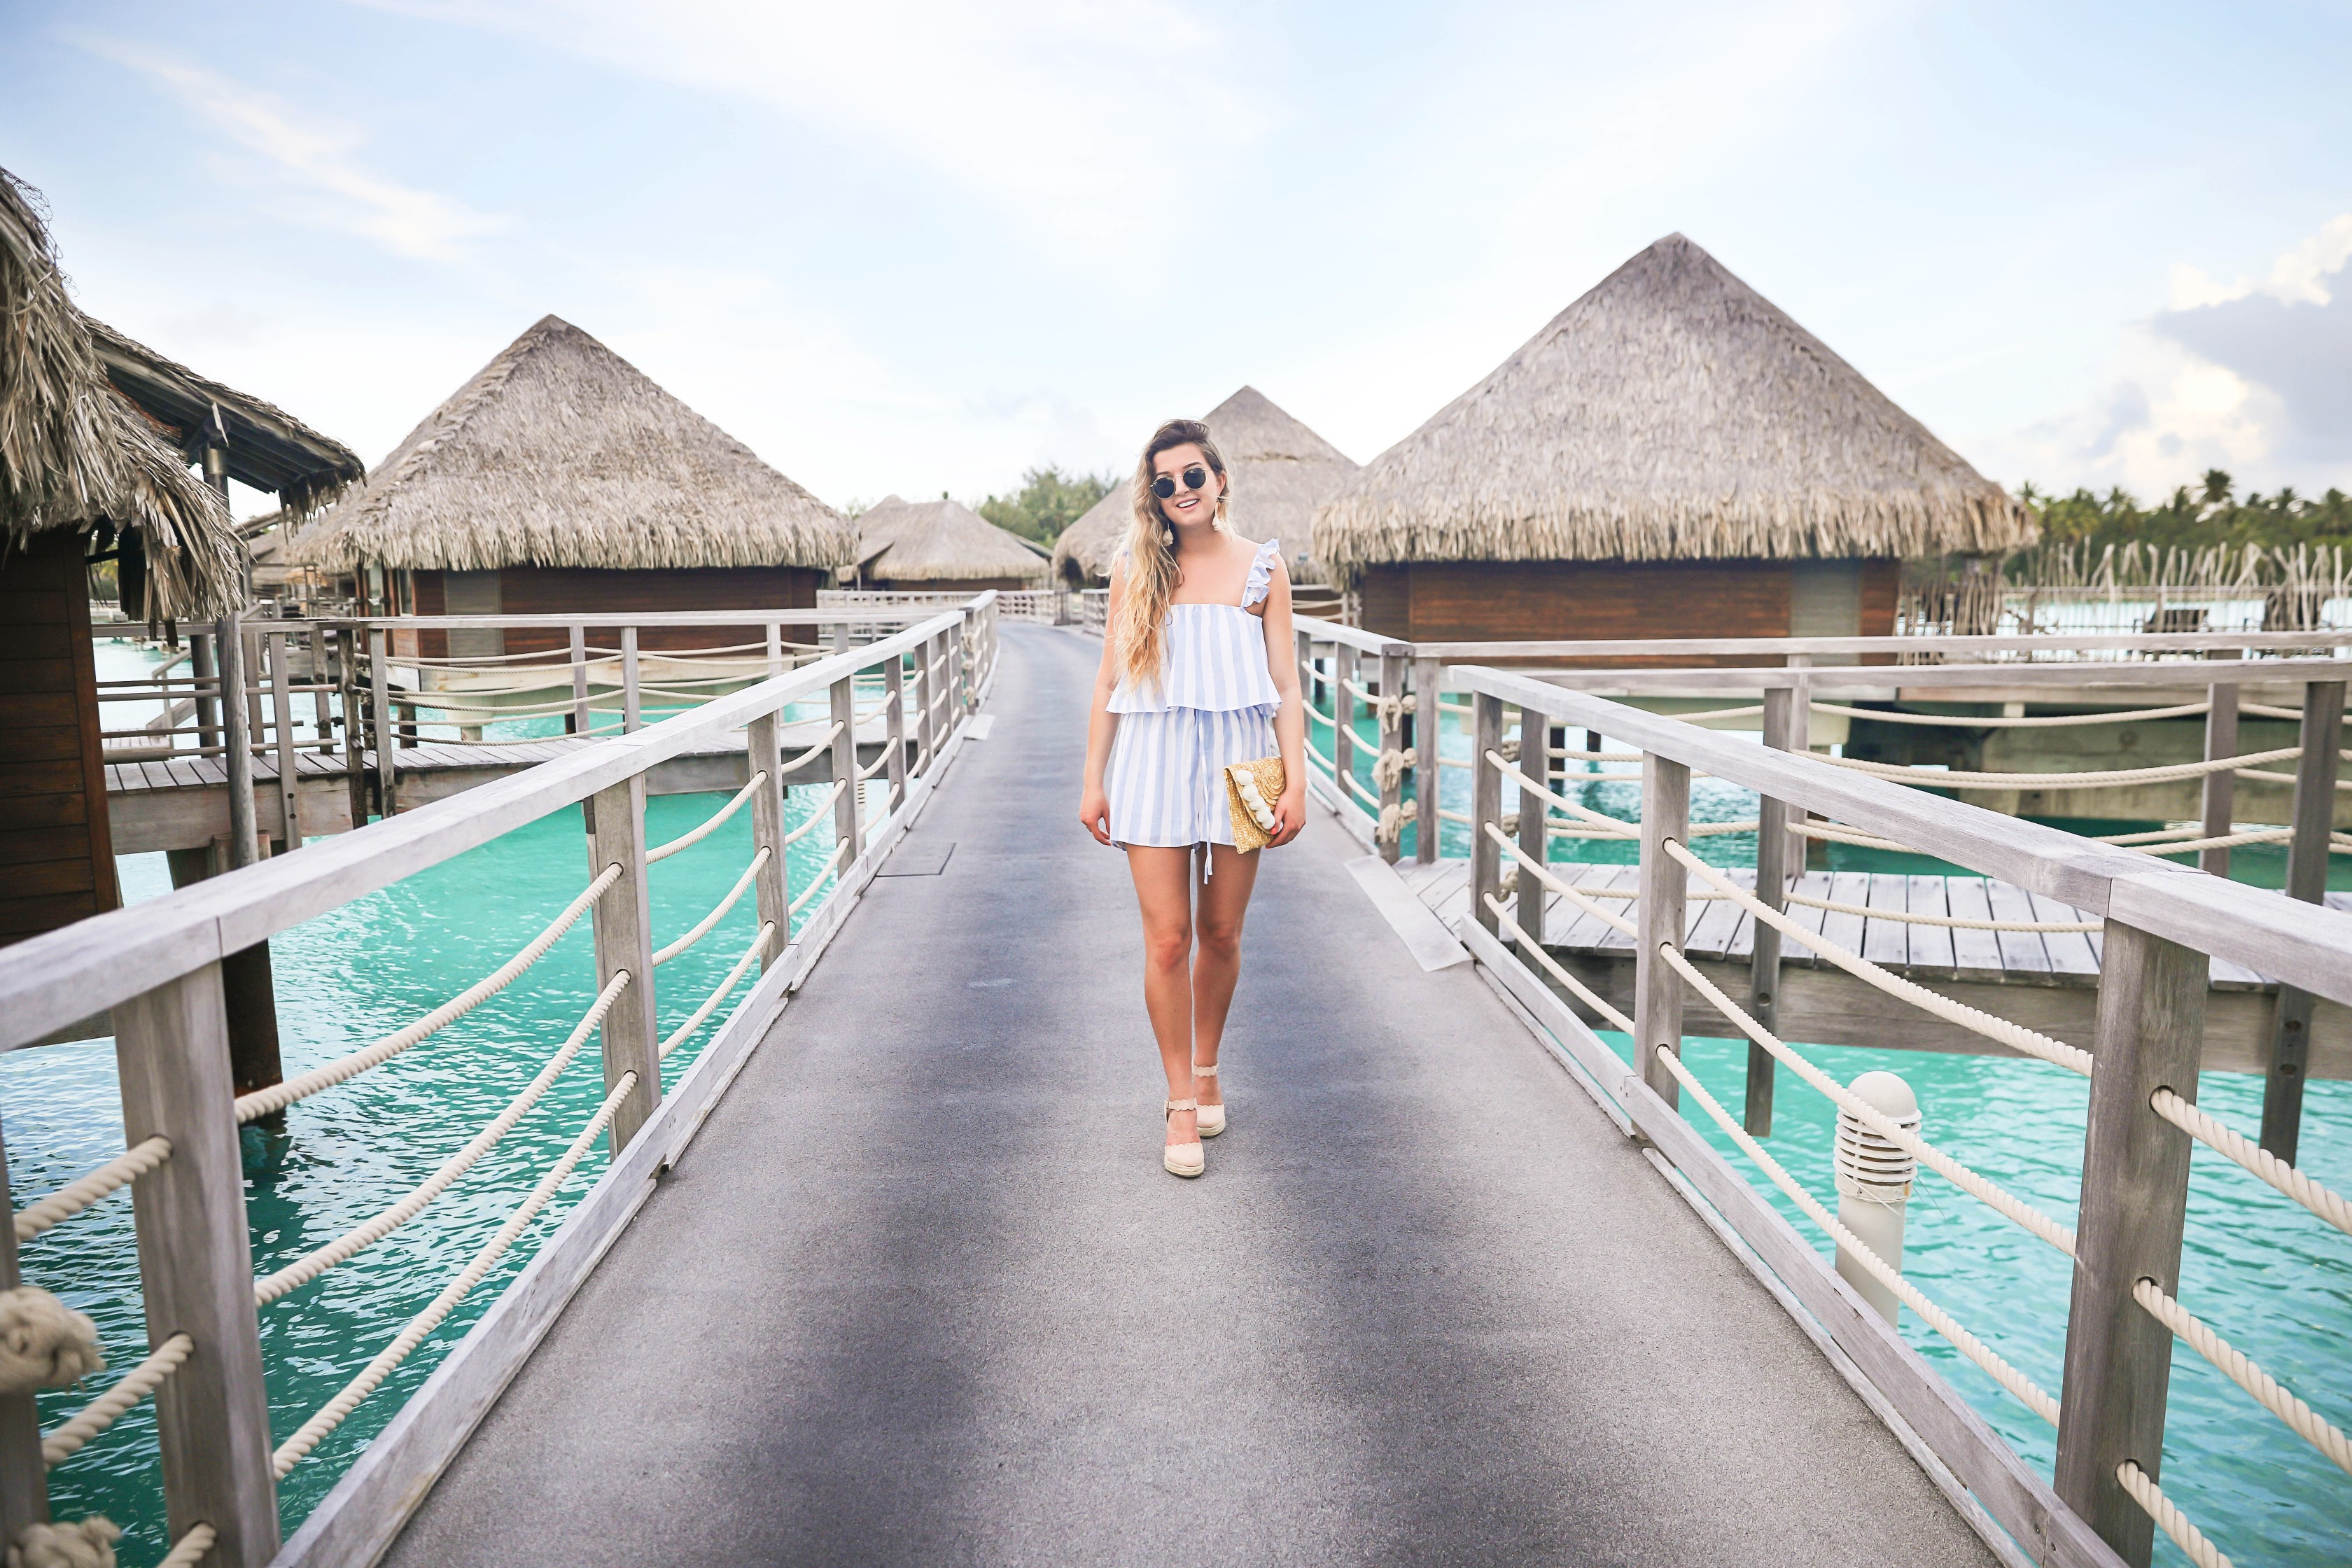 Bora Bora Intercontinental Hotel Thalasso! Trip to Bora Bora on fashion and travel blog Daily Dose of Charm by Lauren Lindmark! The perfect beach outfit! Striped blue and white two piece outfit!